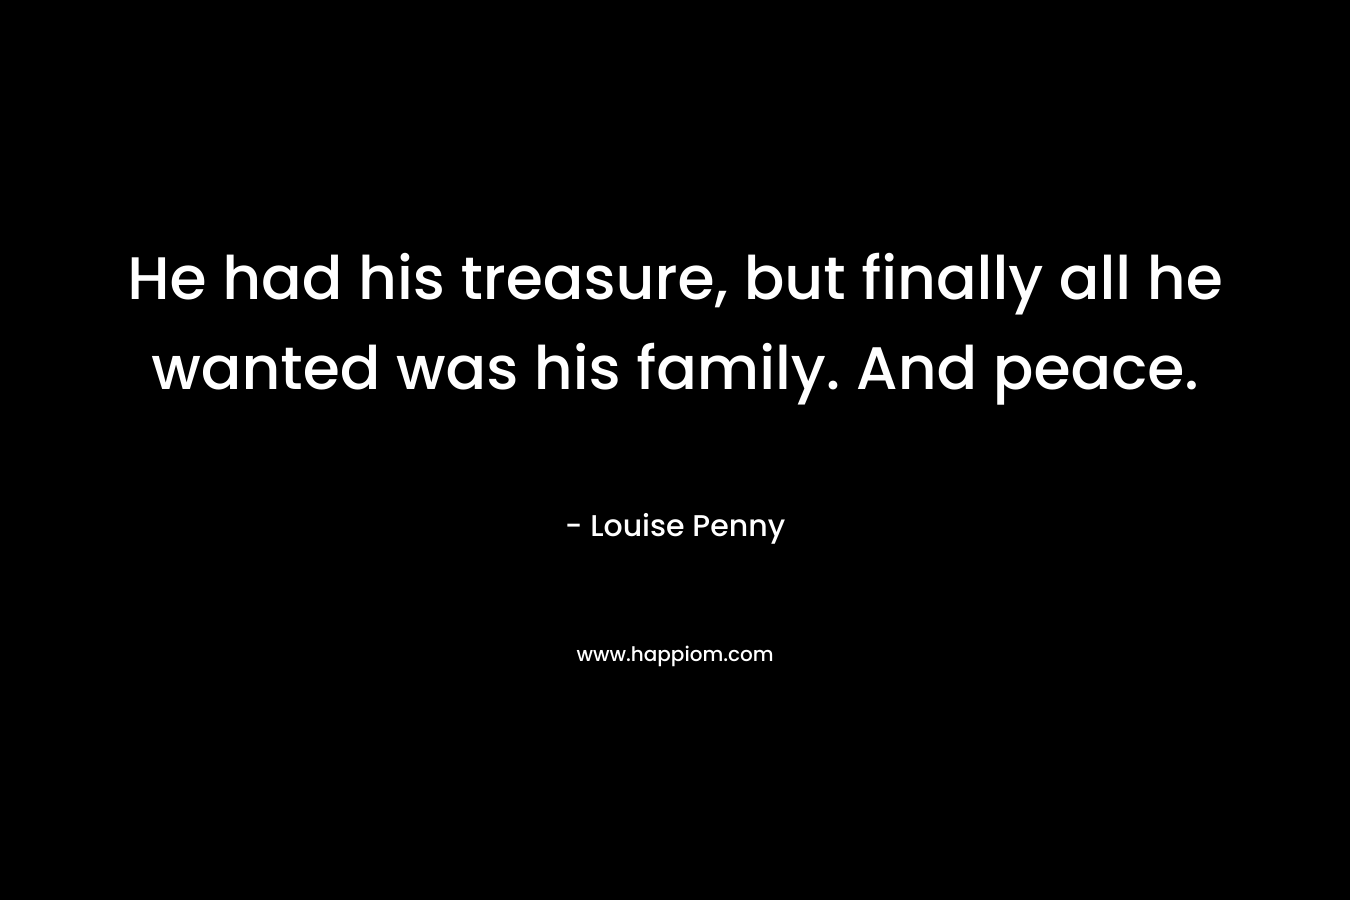 He had his treasure, but finally all he wanted was his family. And peace. – Louise Penny